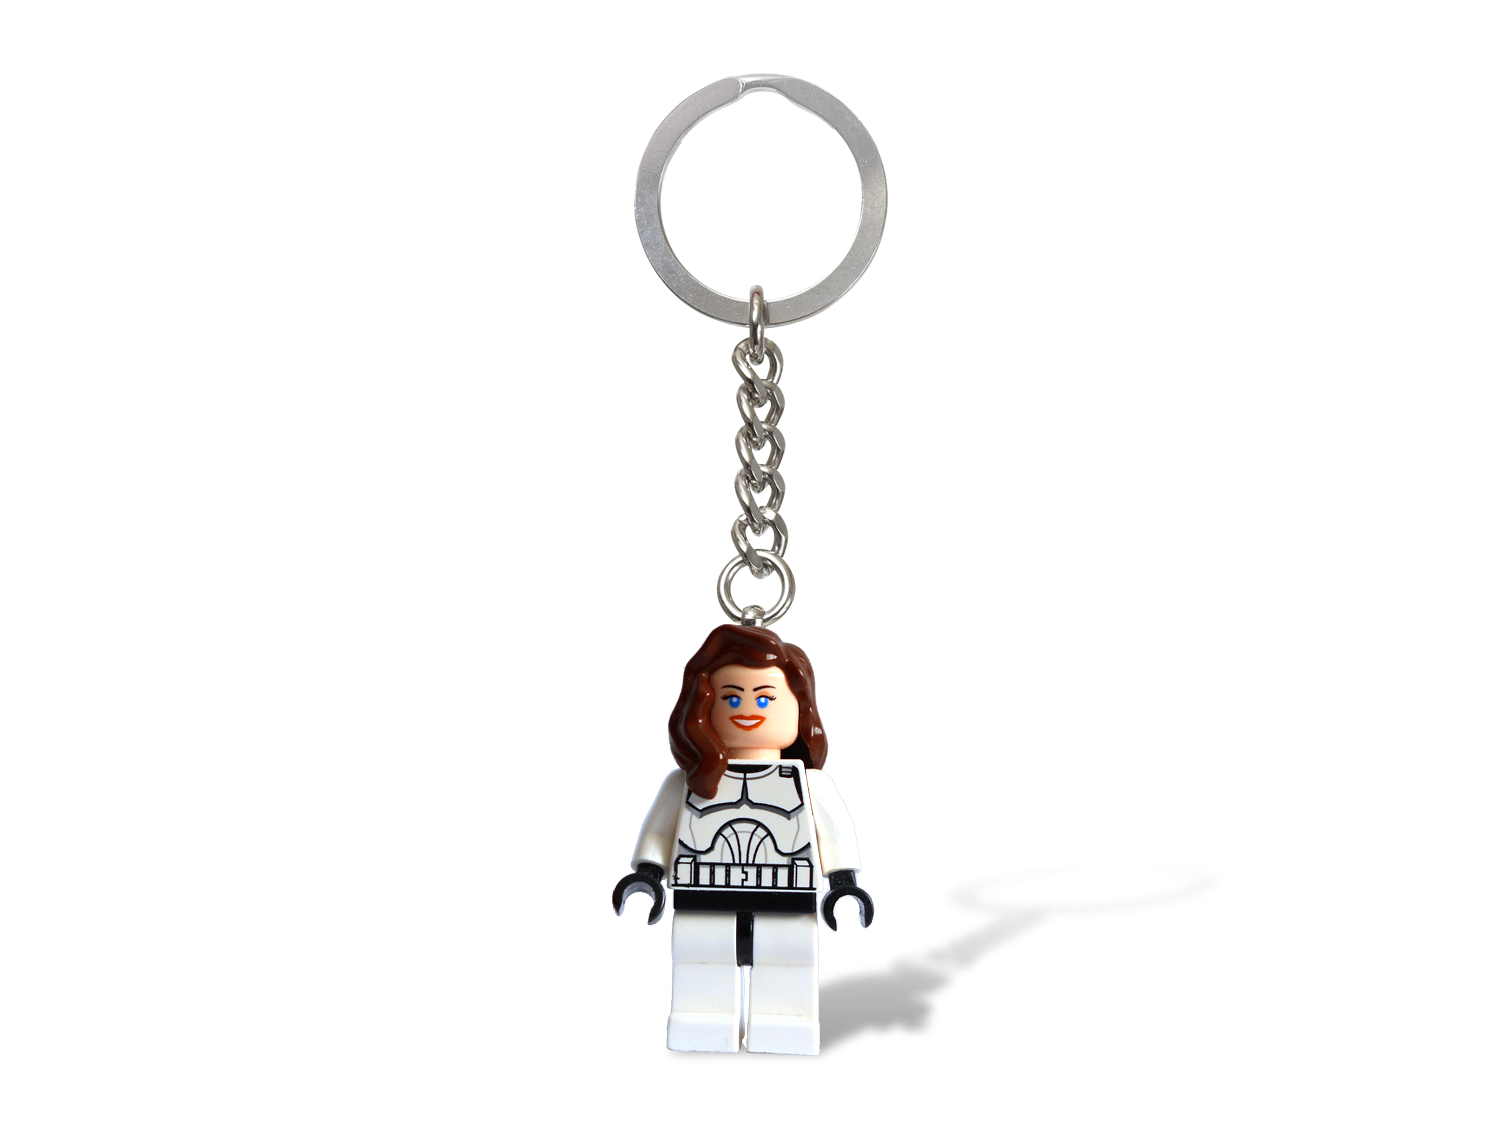 Download PNG image - Cute Key Chain PNG Transparent Image 